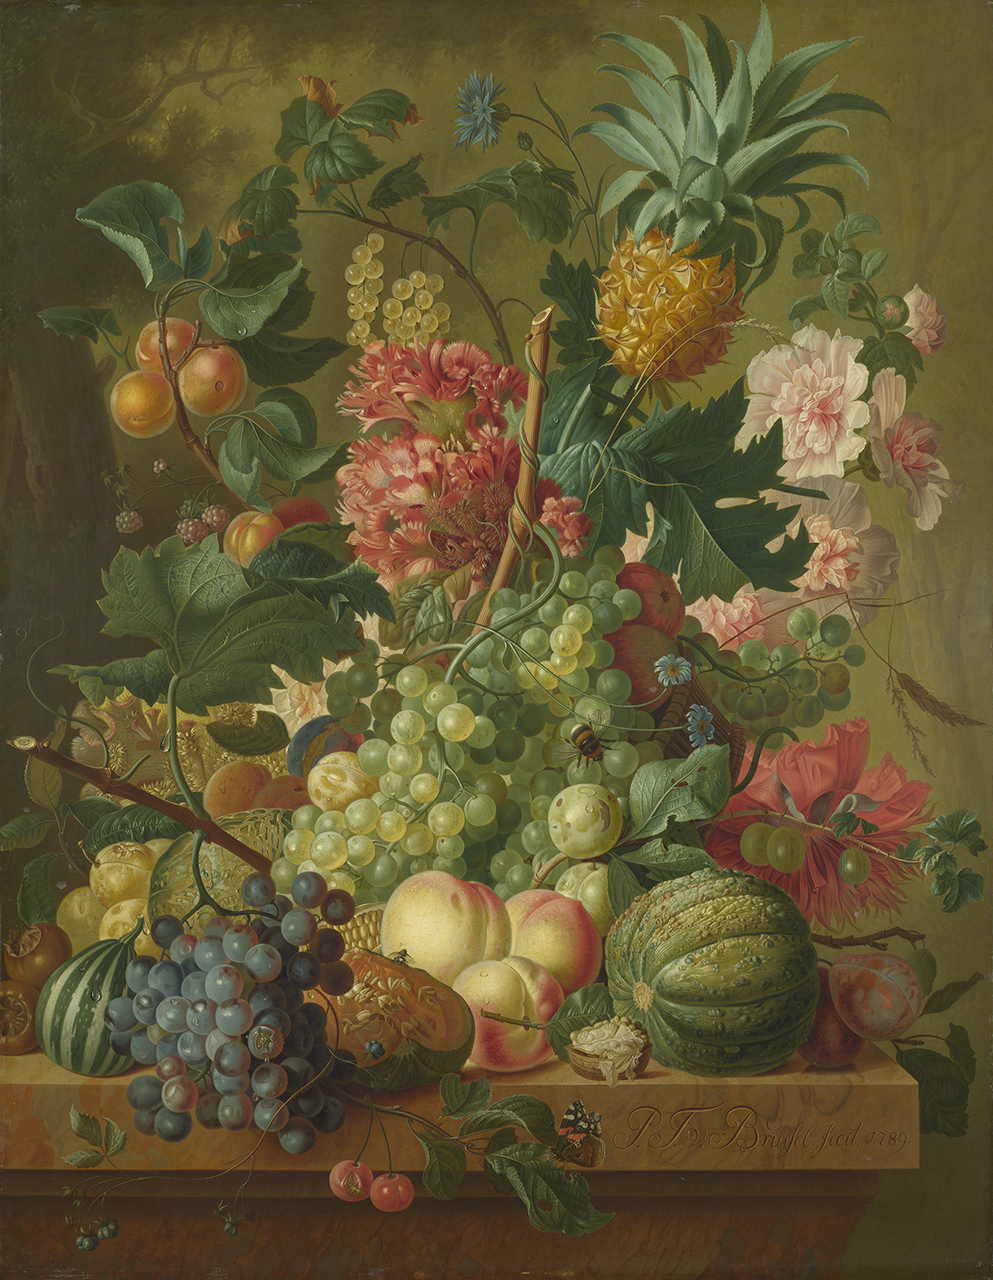 An arrangement of pink, red and blue flowers, green berries, black and green grapes, nectarines and other fruits on a shelf or mantle.